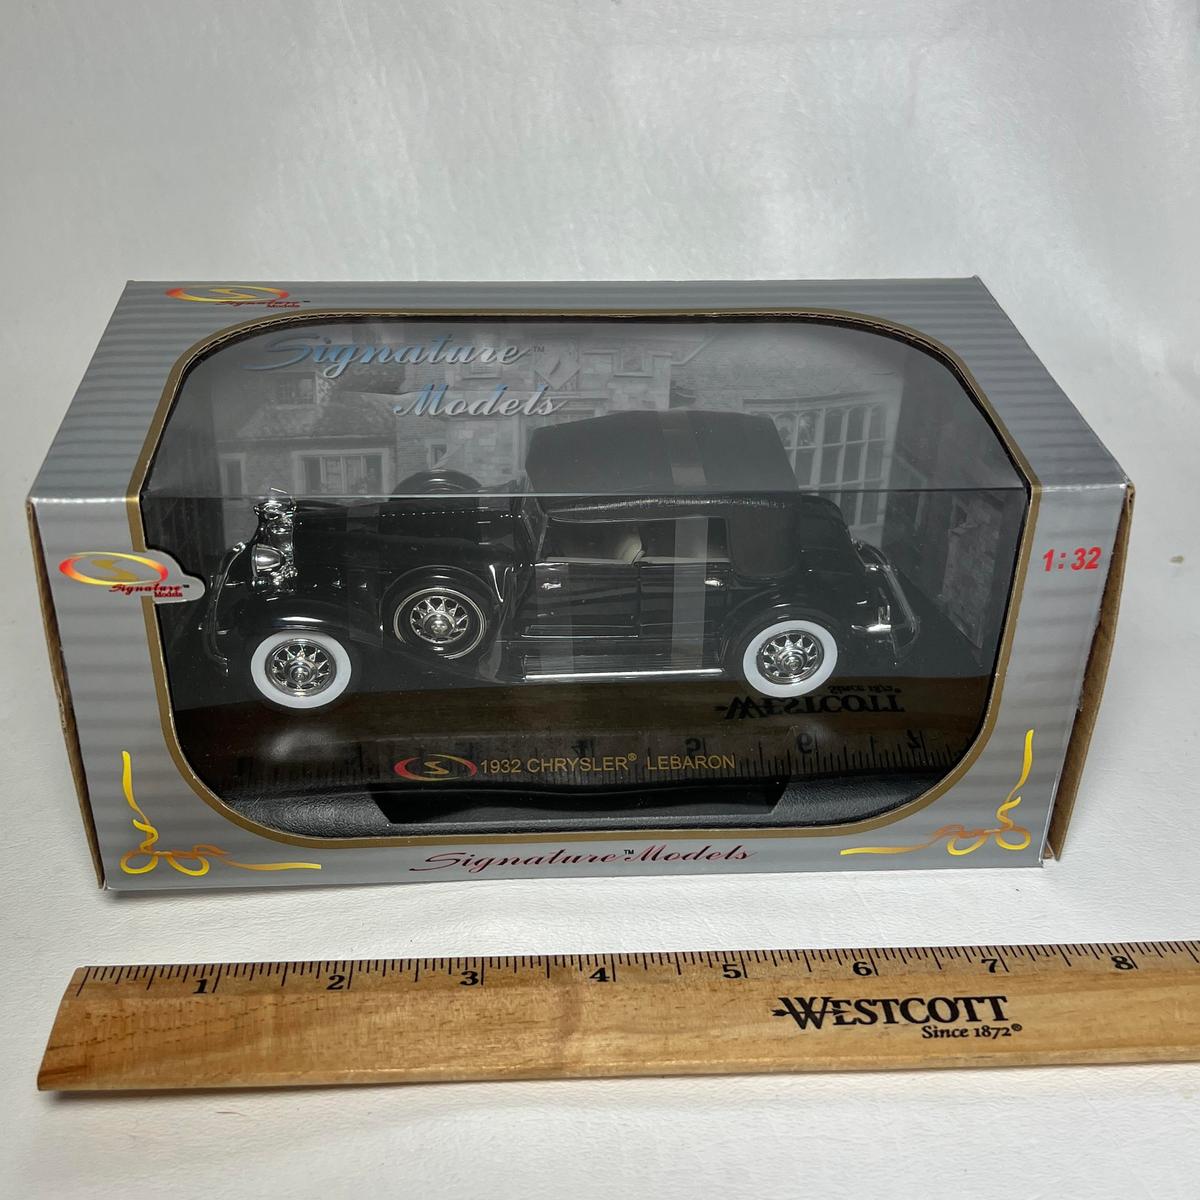 2009 Signature Models 1932 Chrysler Lebaron 1:32 Scale - New in Box